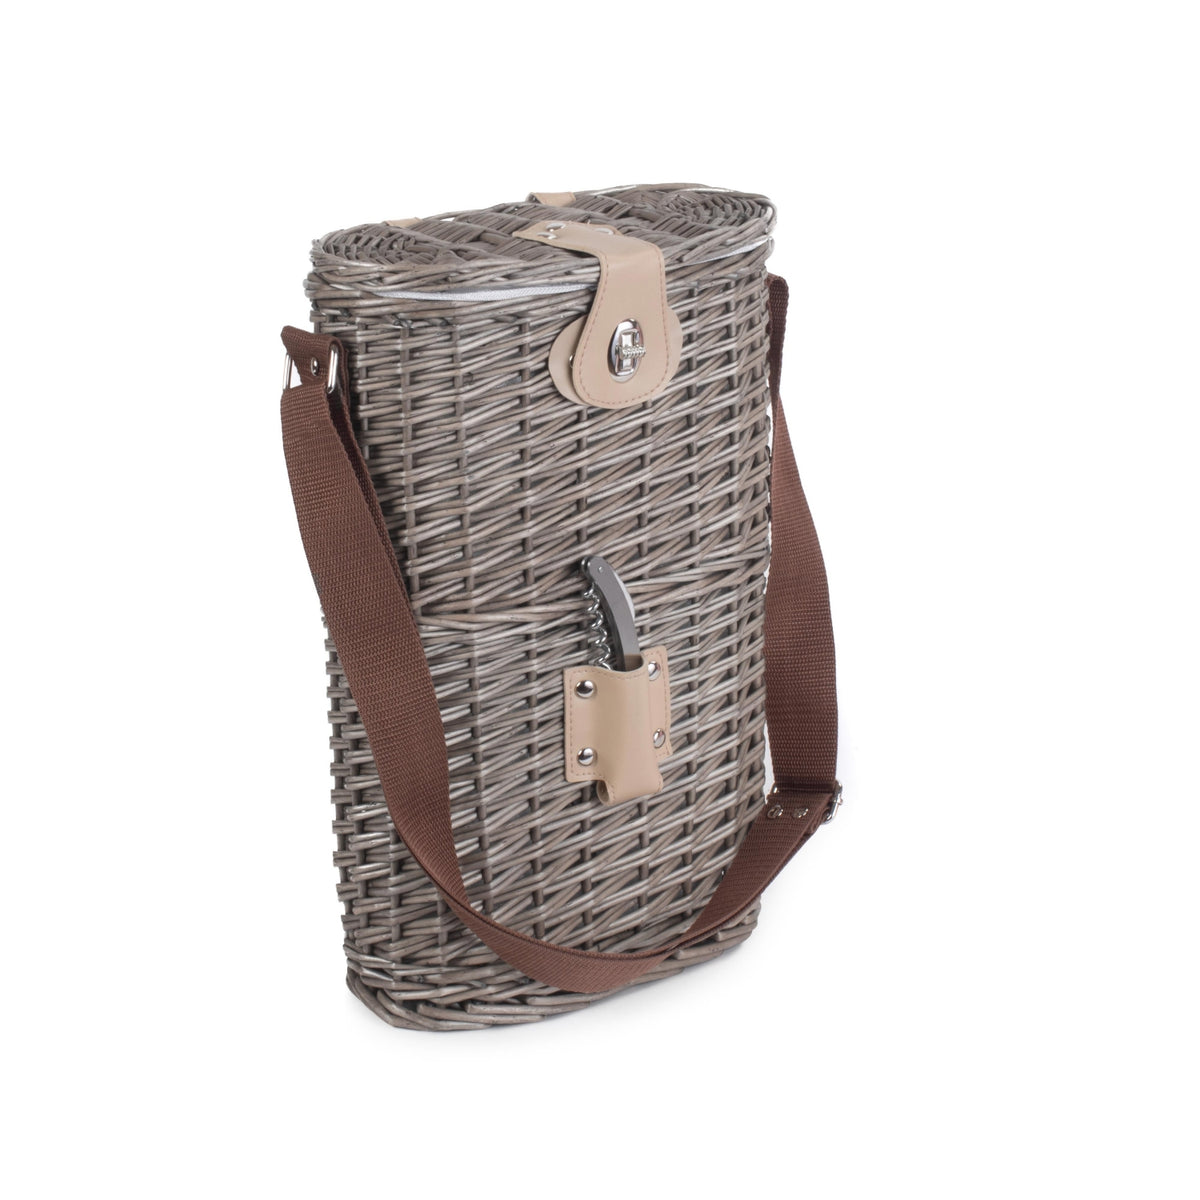 2 Bottle Willow Insulated Bottle Carrier